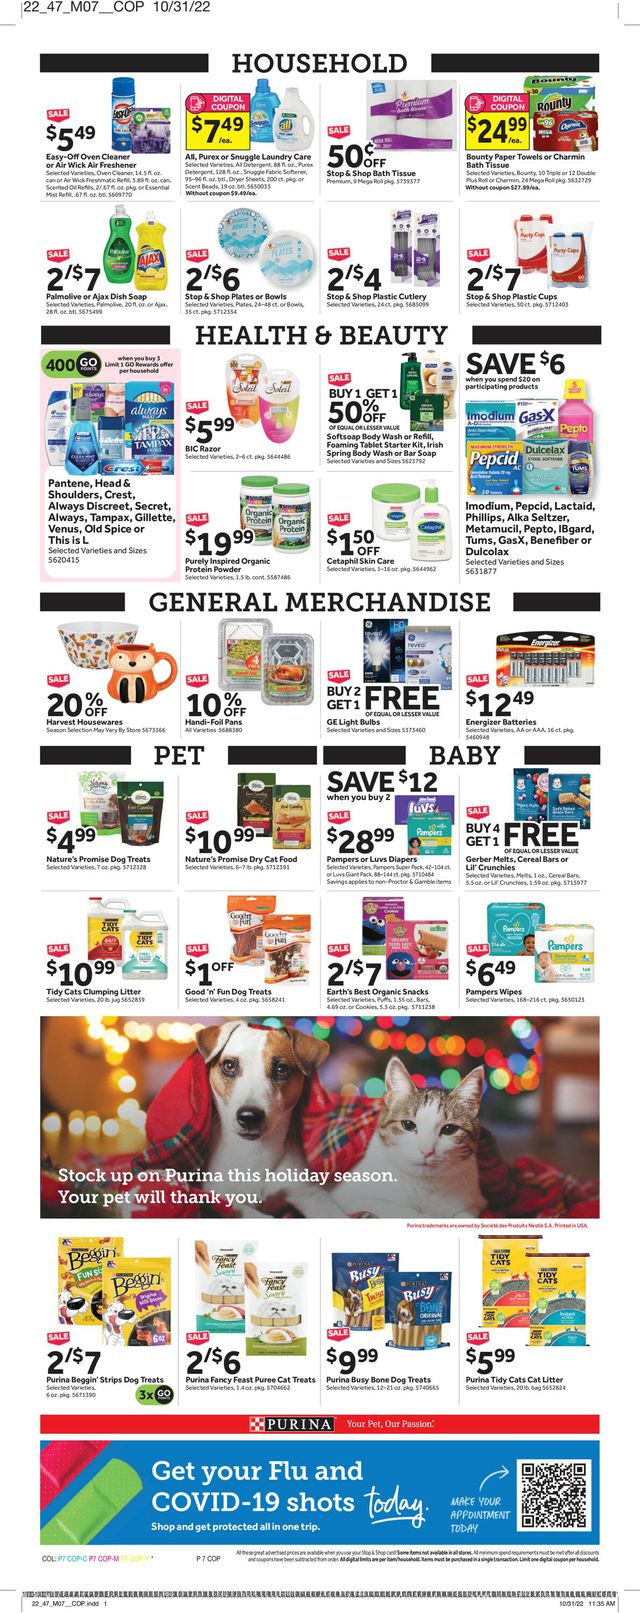 Stop and Shop Ad from 11/18/2022